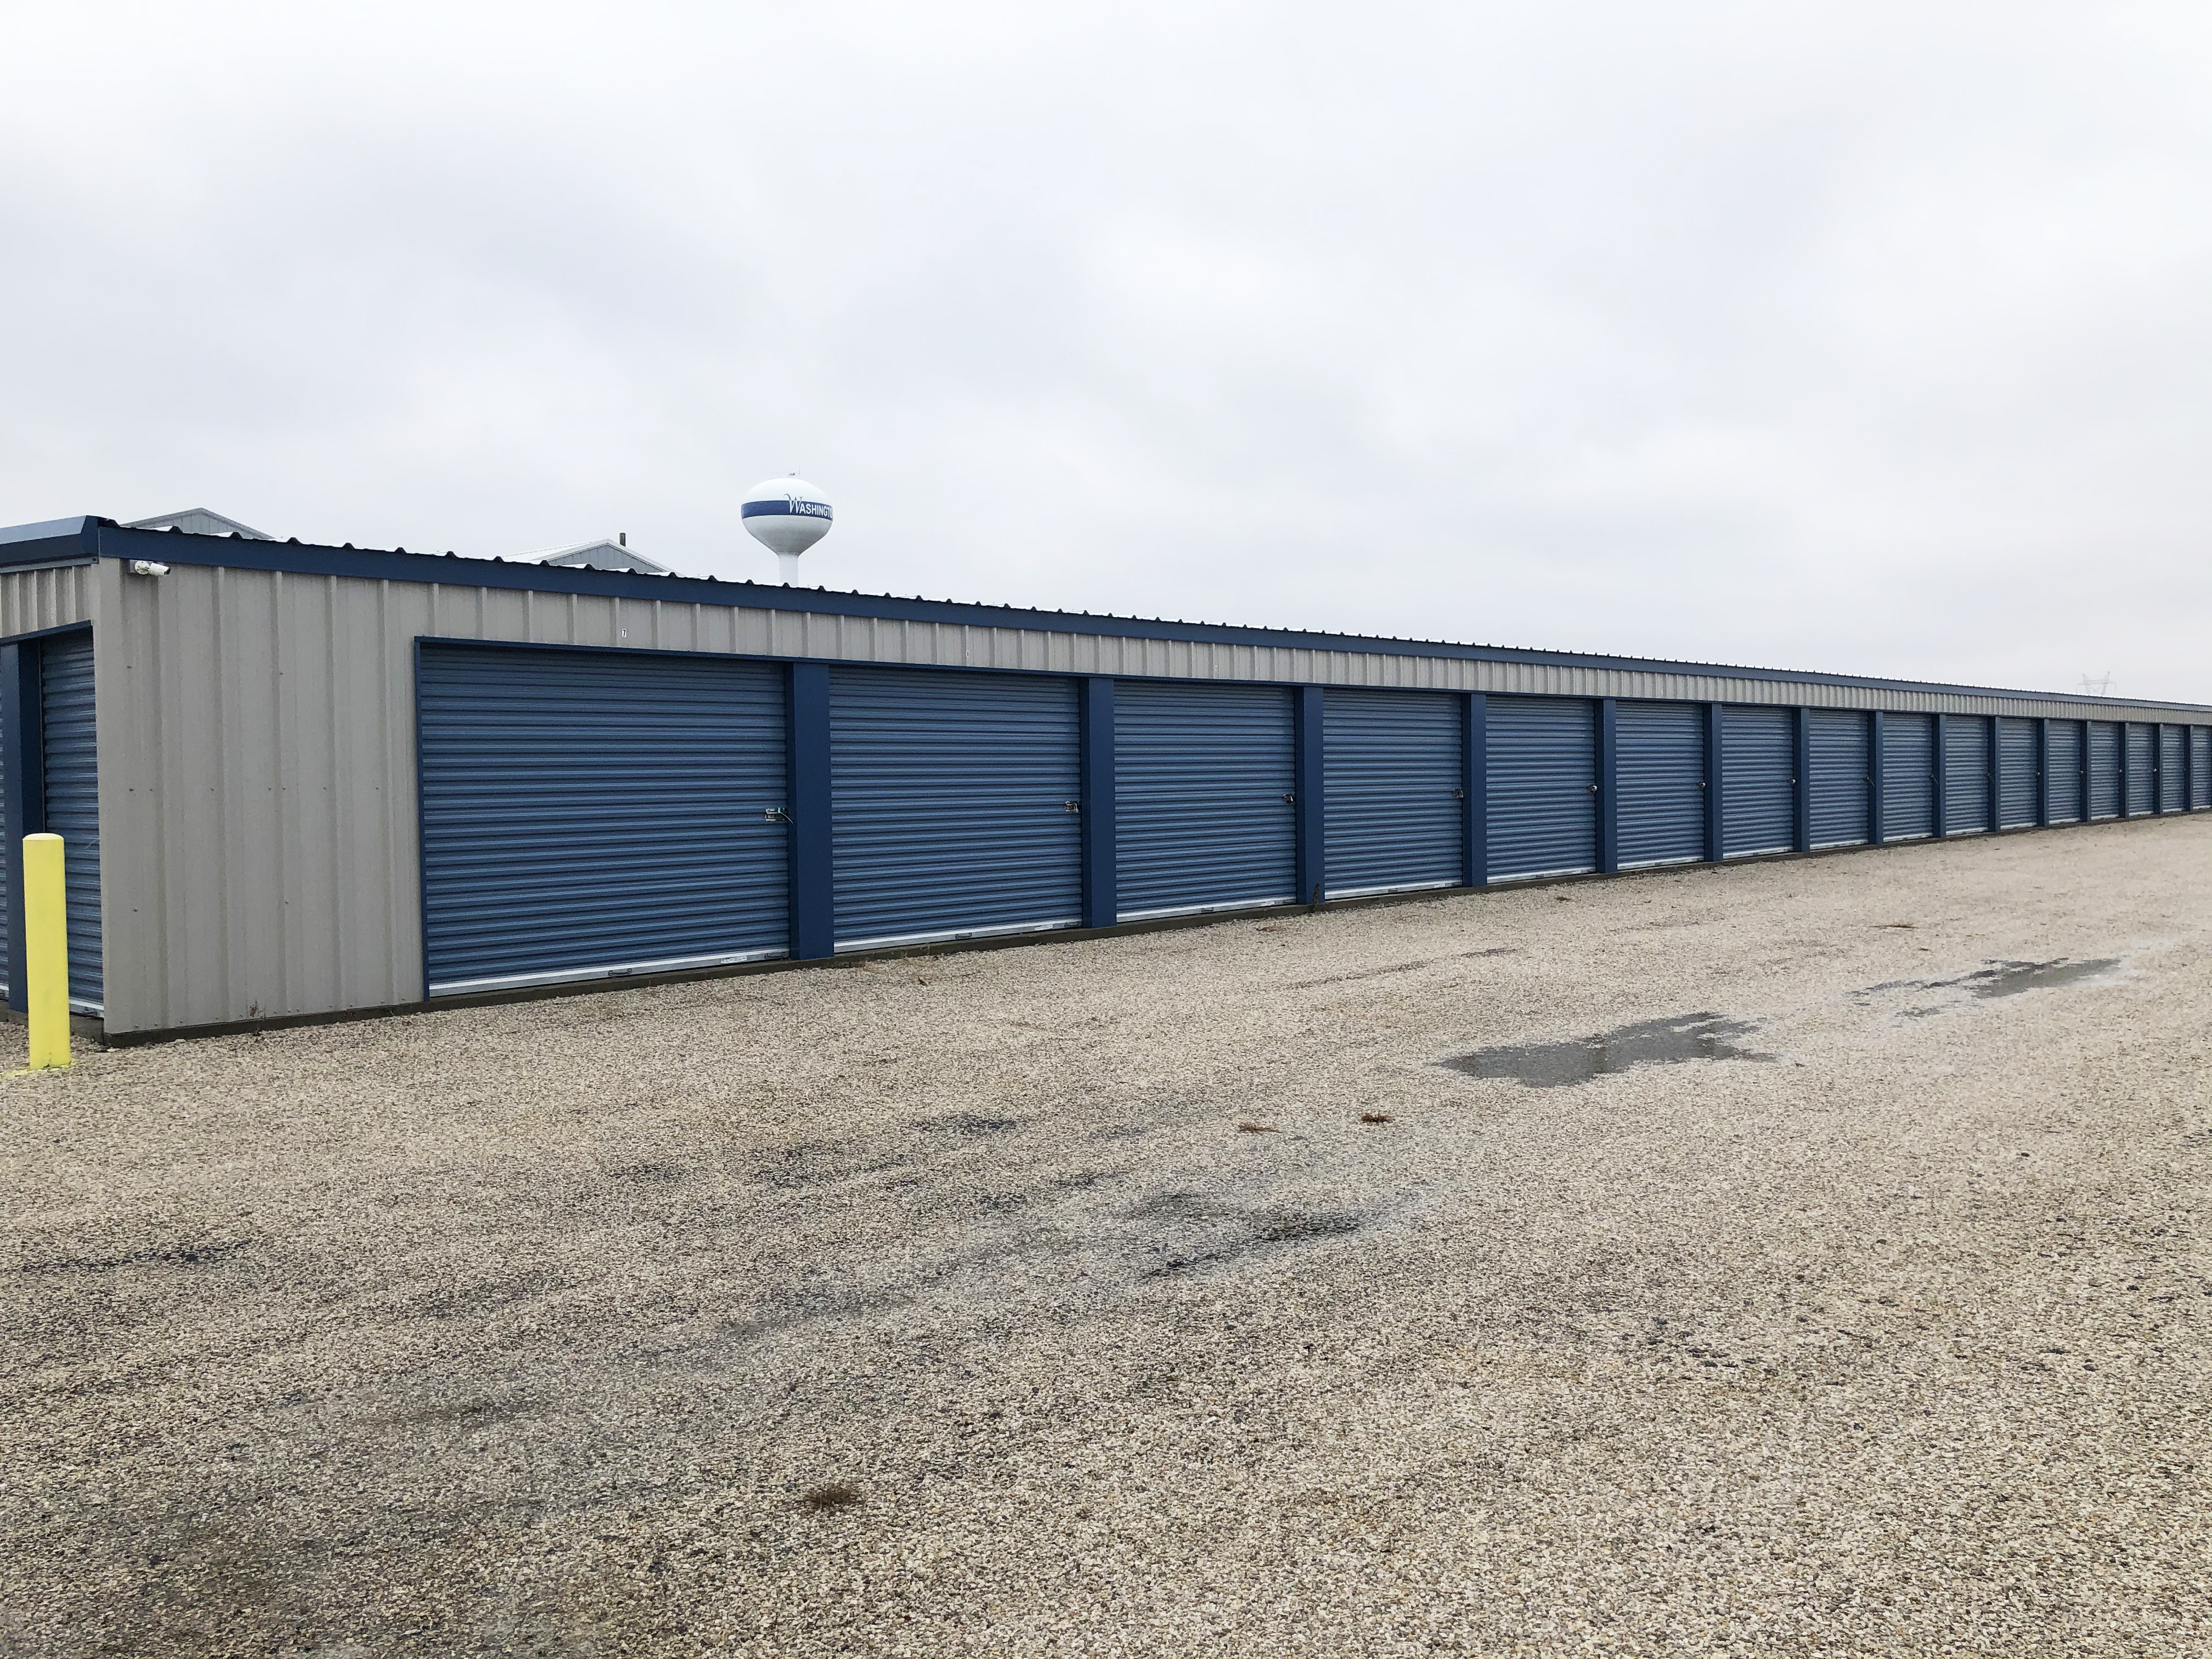 Temperature-controlled and drive-up storage options at Washington, IN's Access Storage, showcasing a well-maintained and secure facility.